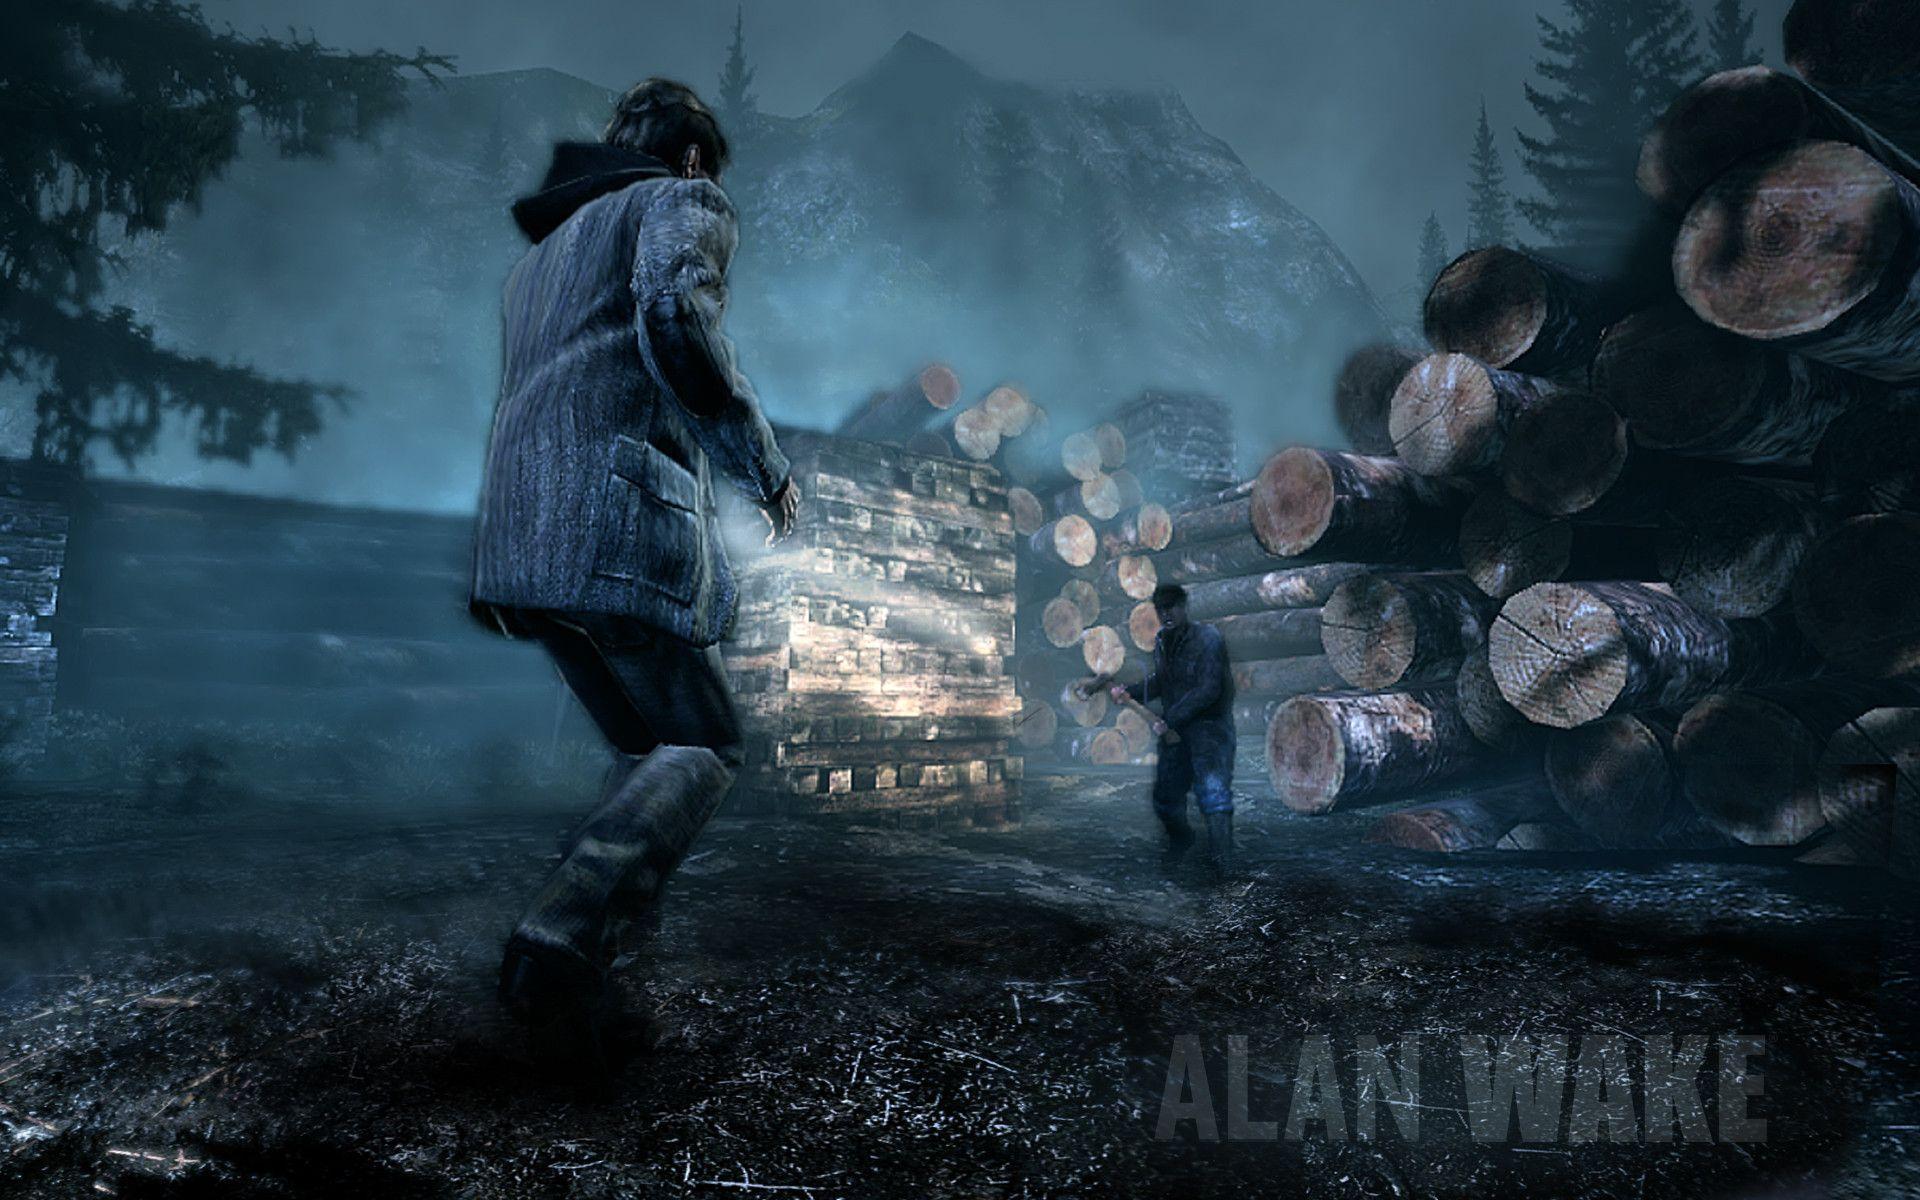 Alan Wake download the last version for windows